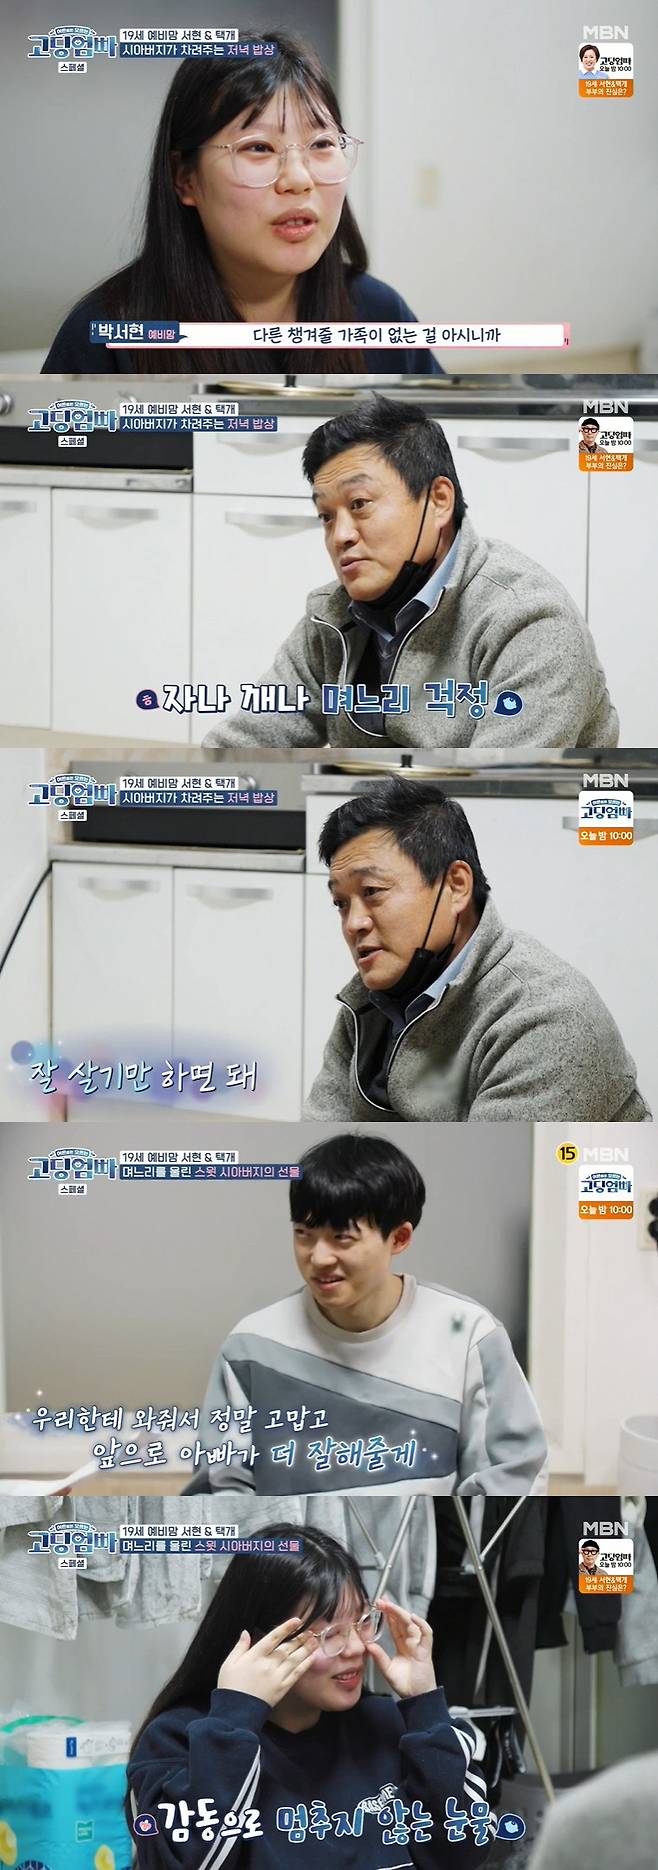 Godding Umpa Park Seohyun Lee Taek-gae has told the whole story of the murder.Channel A entertainment program Goding Umpa, who does not know adults, was broadcast on the 1st, and the story was revealed after the murder of Lee Taek-gae and Seohyun.Late at night, Lee Taek-gaes father visited the couples house and prepared dinner table.In the sincerity of his father-in-law, Park said, I do not express it well, but I know that I do not have any family to take care of me.My father-in-law was worried about the full-scale Park, saying, You just need two, you just need to live well.Lee Taek-gae said, I always have a good deal of care and affection for Seohyun. I will do better when I see Father doing it to Seohyun.My father-in-law wrote a letter with a heartfelt red underwear symbolizing good luck, and Park Seohyun was moved and tears were shed.Make your heart at ease, said the father-in-law, expressing affection.The two men, Lee and Seohyun, had been ready to give birth and were headed to the hospital for induction.If you have a cesarean section, is (Tookie) not a legal marriage relationship? I need a guardians consent, is there anyone to contact? the nurse asked.After thirty hours of induction, the water burst and the pain began. Seohyun poured tears into the pain. In 35 hours, the uterine door opened and attempted natural delivery.With a loud cry, the bean finally came out of the world.Park Seohun, who told me about the recent recovery with the bean beans in the video call, said, I was sick when I gave birth, but now it is okay.I did not know my husband would cry, but after Christina Aguilera came out, I was crying while stroking my head.  I am eating well because I sent a postpartum care center from Godding Umpa. But the two men, who were sensitive to hard-earning child care, talked up and talked about small things. My husband seems to have changed after giving birth to Christina Aguilera.When I was raised, I could not sleep, I was stressed, I was sensitive, and I often fought, but that day I did not sleep for an hour.So I think I did it a little more. The sudden weapons threat raved and surprised everyone. On the day of the incident, the crew met with Park.Park Seohyun said: For a minor reason, I started a verbal fight, and the thunderclap screamed, so I picked up the knife in anger.I did not want to live because of you, I did not have a child with you and I said it would be better to raise myself. Because of the emergency measures, the caterpillar took the child from home and cried a lot.Im sorry, Christina Aguilera said no to the wrong thing. Christina Aguilera said she didnt want to show me, and she didnt want to see my face.He said he would not accept an apology. He said he would get psychiatric treatment and if he had symptoms, he would be treated. Park Seohyun reflected that if I did not listen to the knife, I would not fall off with the child and this would happen.Lee said, I keep ignoring the child and sending Christina Aguilera pictures, and there is no word, and the childcare allowance is received by Seohyun as a bankbook.I do not send it because I want to send it, he said. I did that to Christina Aguilera and took out child support, but I did not think I should leave it alone. Park went to neuropsychiatry to reverse the mistake.Park Seohun, who met a specialist, said, My parents divorced at elementary school and when Father came in after the divorce, I cursed and assaulted me.I wanted to get out of the house quickly and I didnt want to go to bed with Father. I left the house and lived in my husbands house.And I told my parents that I was erased because of my parents. I was hit by my husband and I came to see him because he was sorry, so I took a look at him.After that, I met again because I knew I was pregnant again. I fought once before the end of the pregnancy, and then I hit the police station.Theres a high depression and high anxiety - have you met your boyfriend and become worse, the specialist asked, while Park Seohyun admitted yes.After the consultation, the specialist said, It will be emotionally stable to see the child. Stress resistance is low and emotional ups and downs easily.